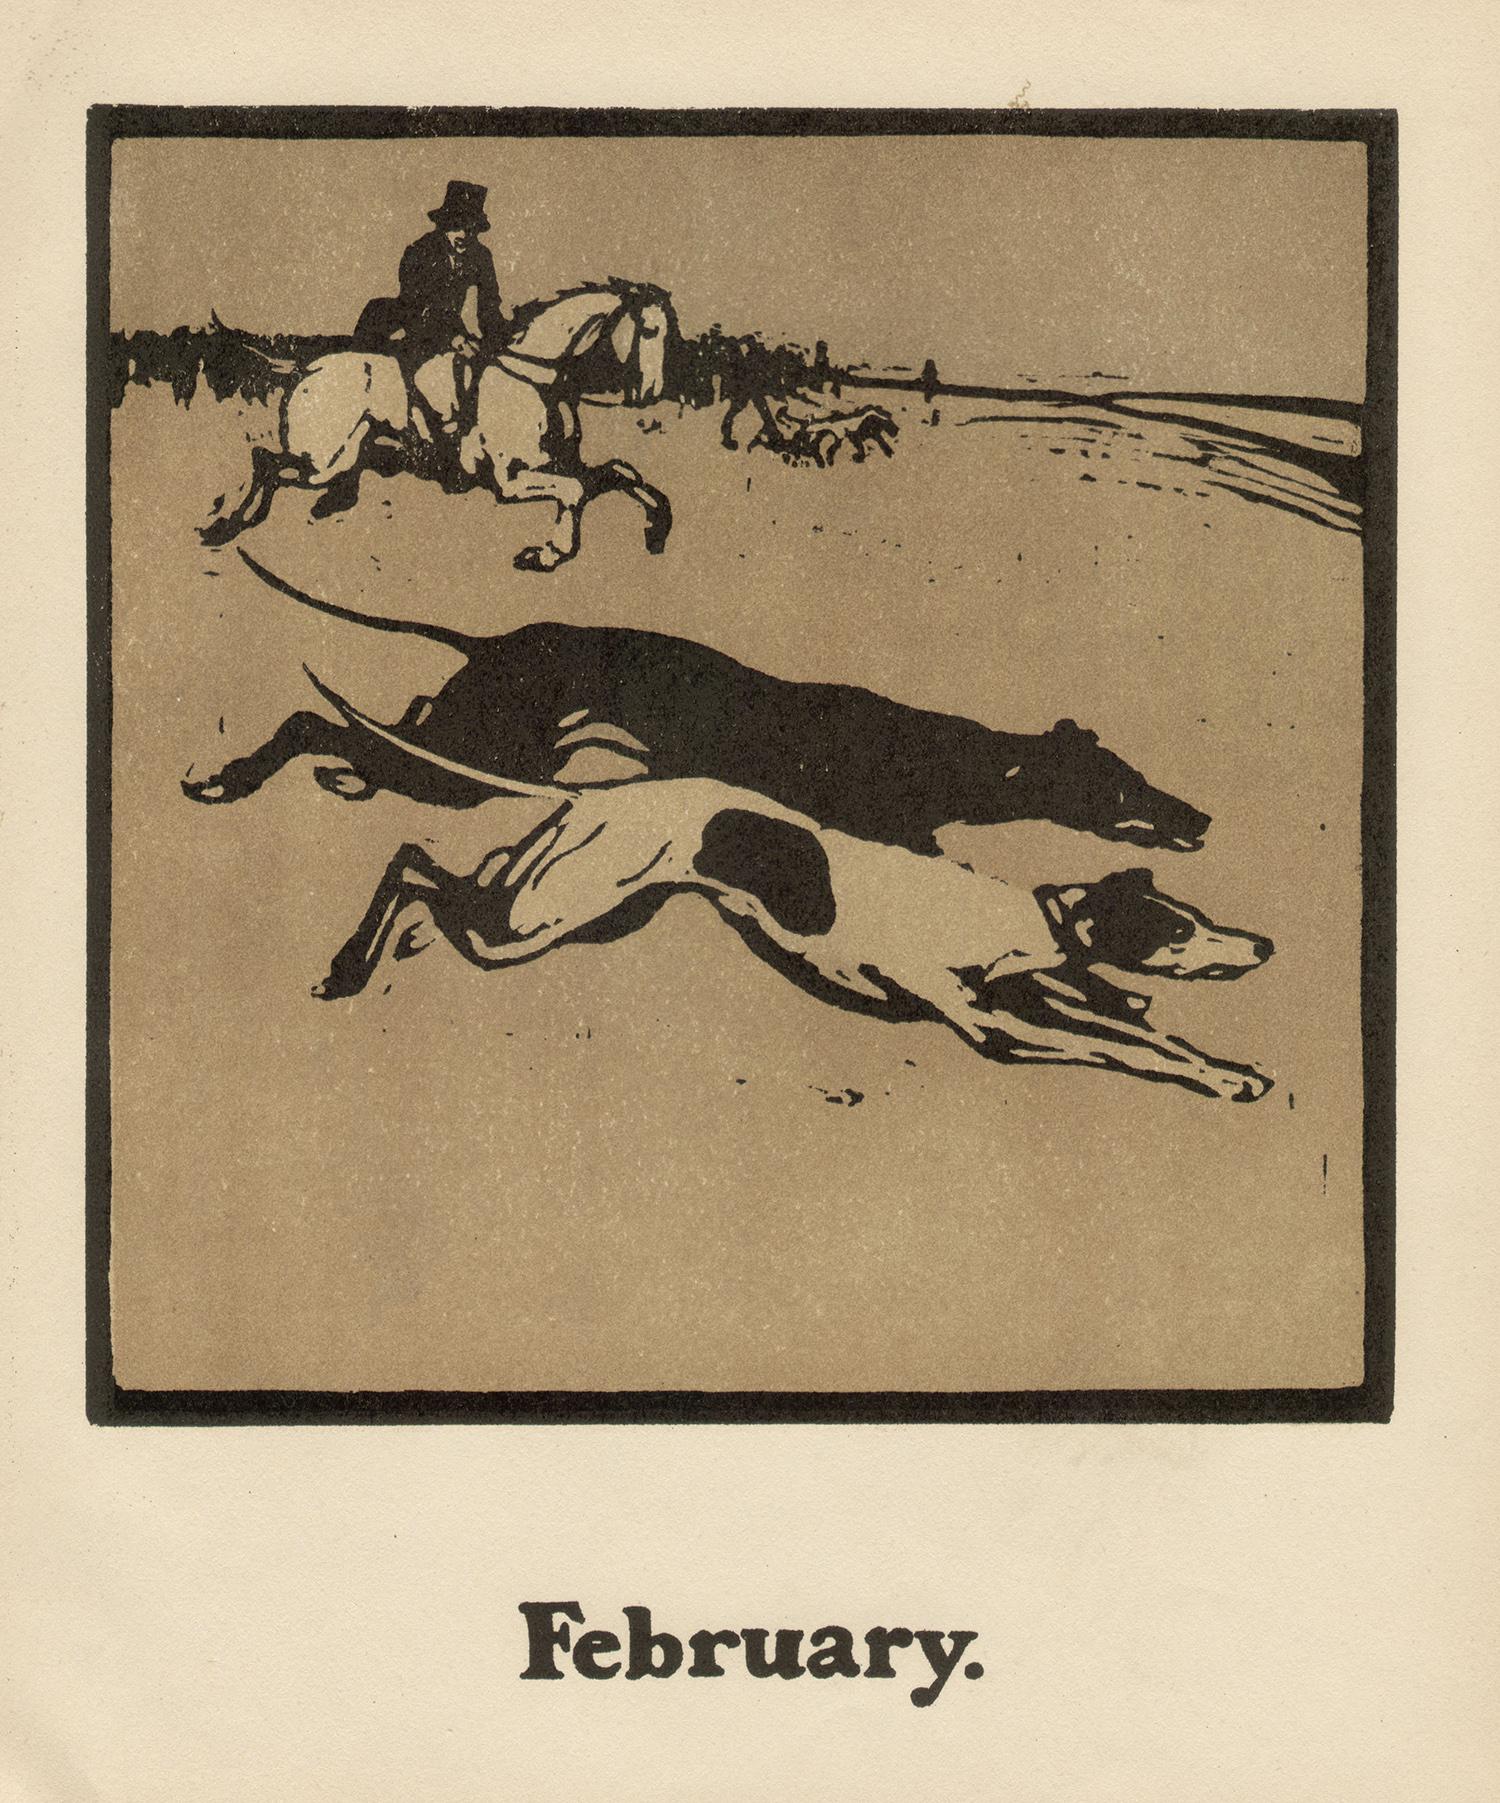 Colour lithographic transfer from wood block.

William Nicholson was a famous British graphic artist who produced a series of months of the year illustrated by sports - 'An Almanac of Twelve sports'. 

310mm by 240mm (sheet) 195mm by 195mm (image)